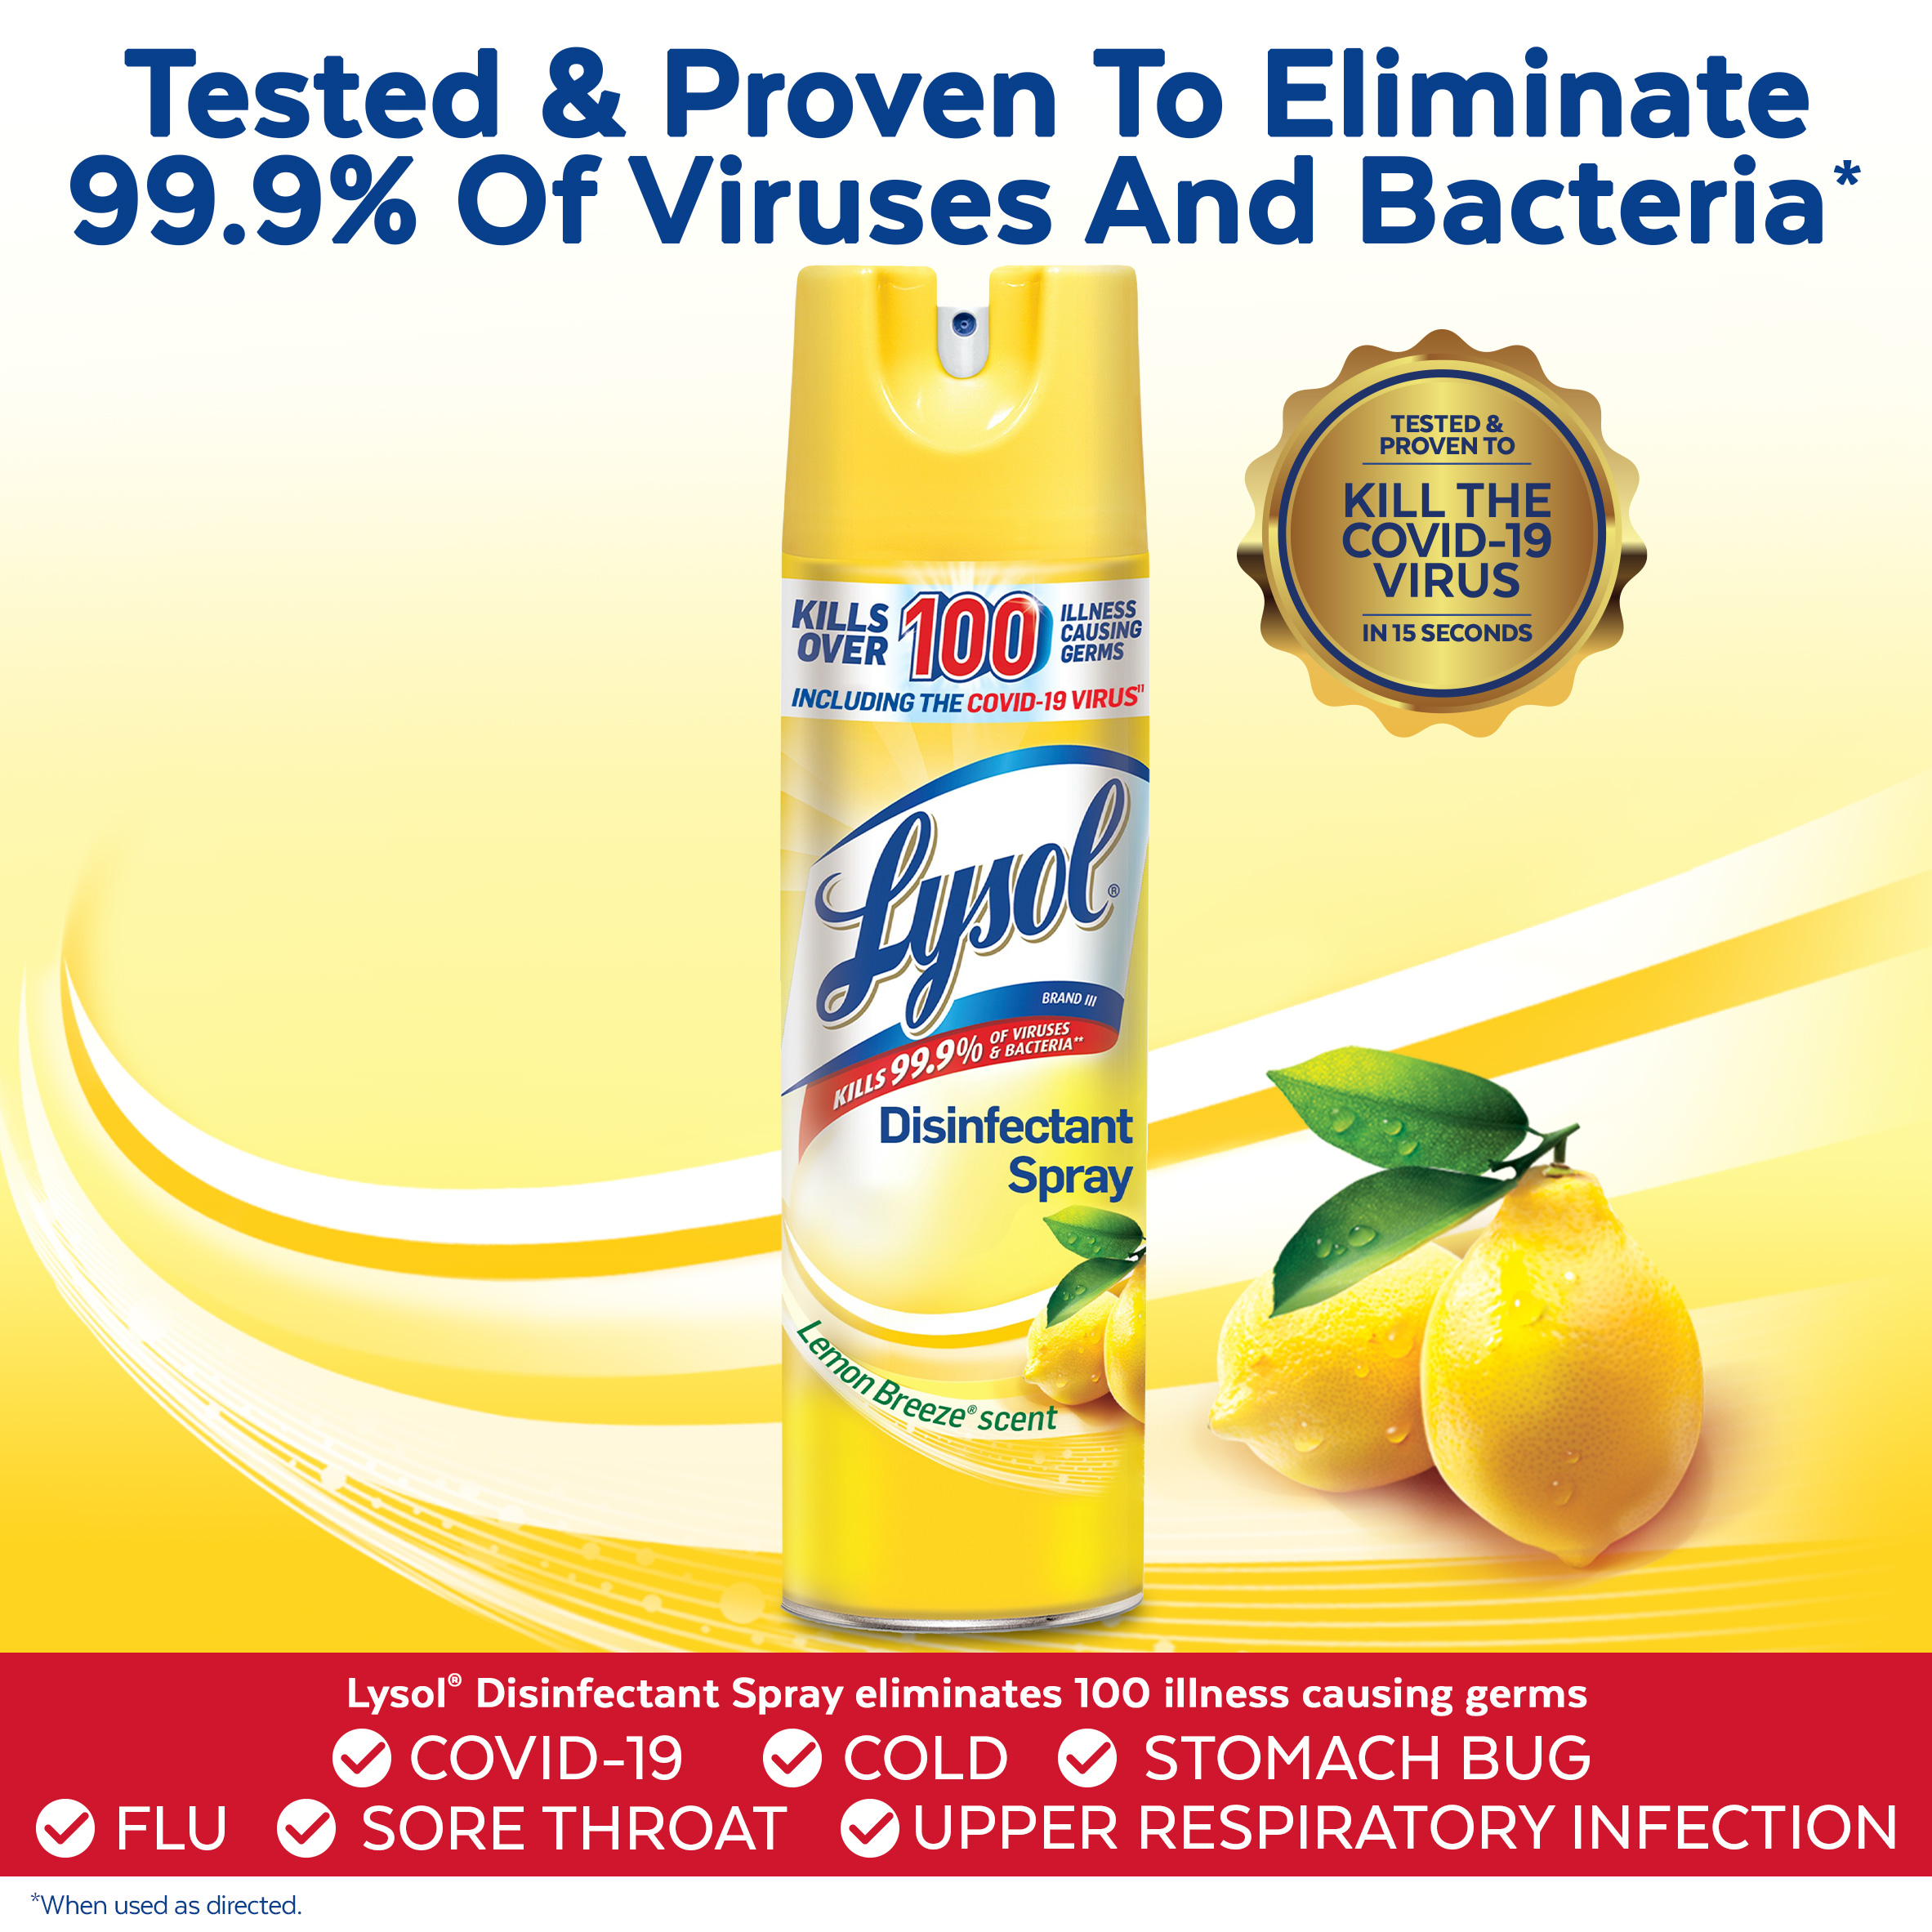 Lysol Disinfectant Spray, Lemon Breeze, 19oz, Tested and Proven to Kill COVID-19 Virus, Packaging May Vary​ - image 3 of 9